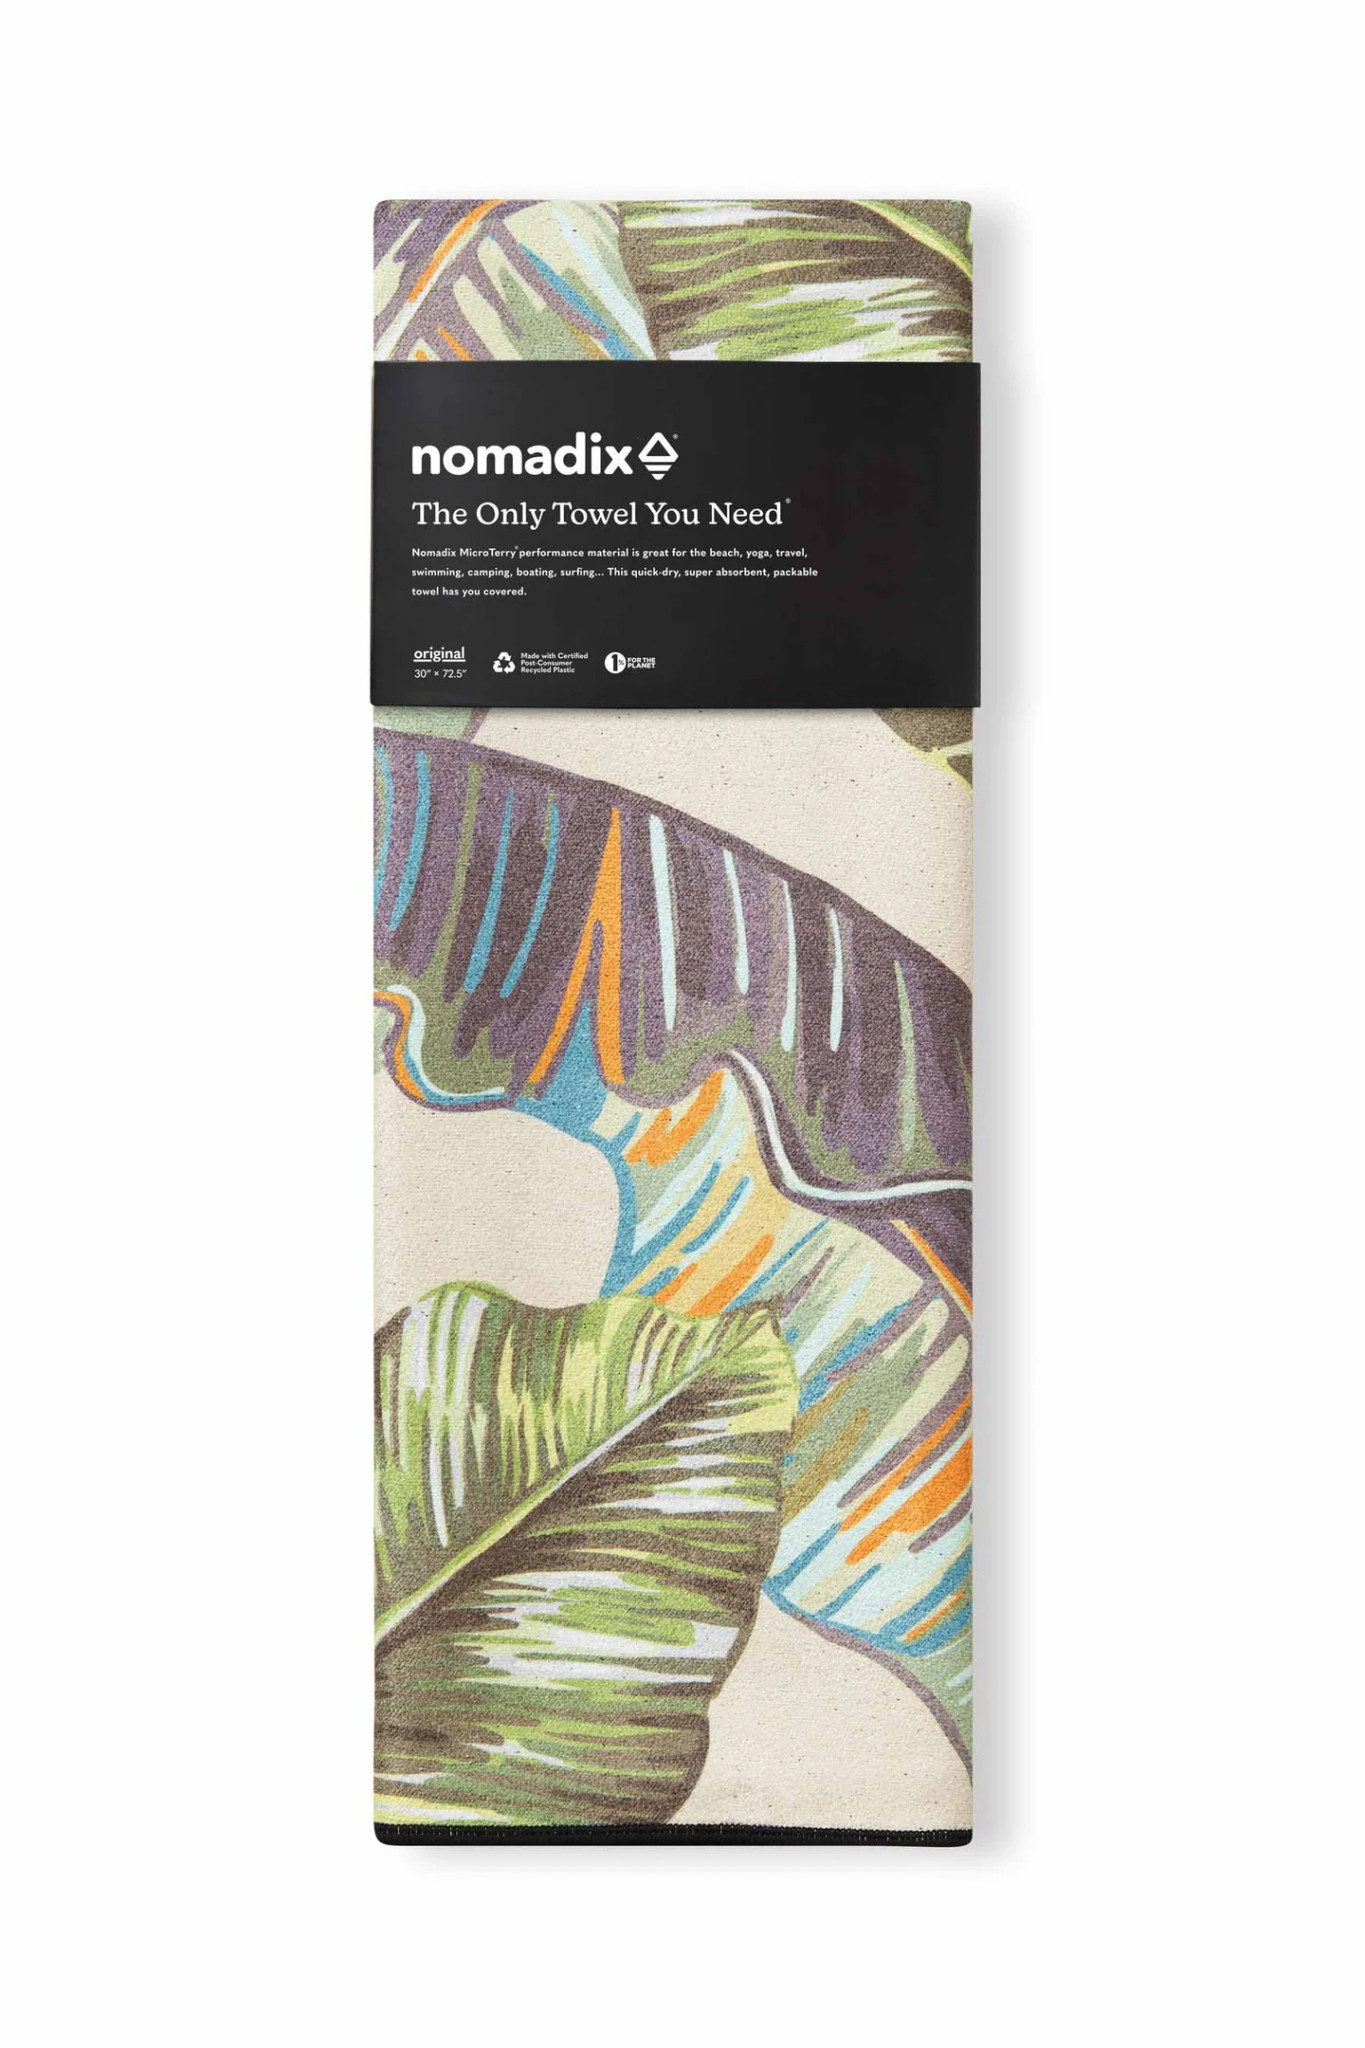 https://cdn11.bigcommerce.com/s-ycmjyu2rb7/images/stencil/2048x2048/products/430240/406489/nomadix-nm-fidl-102-original-towel-packaging__28949.1690564459.jpg?c=1